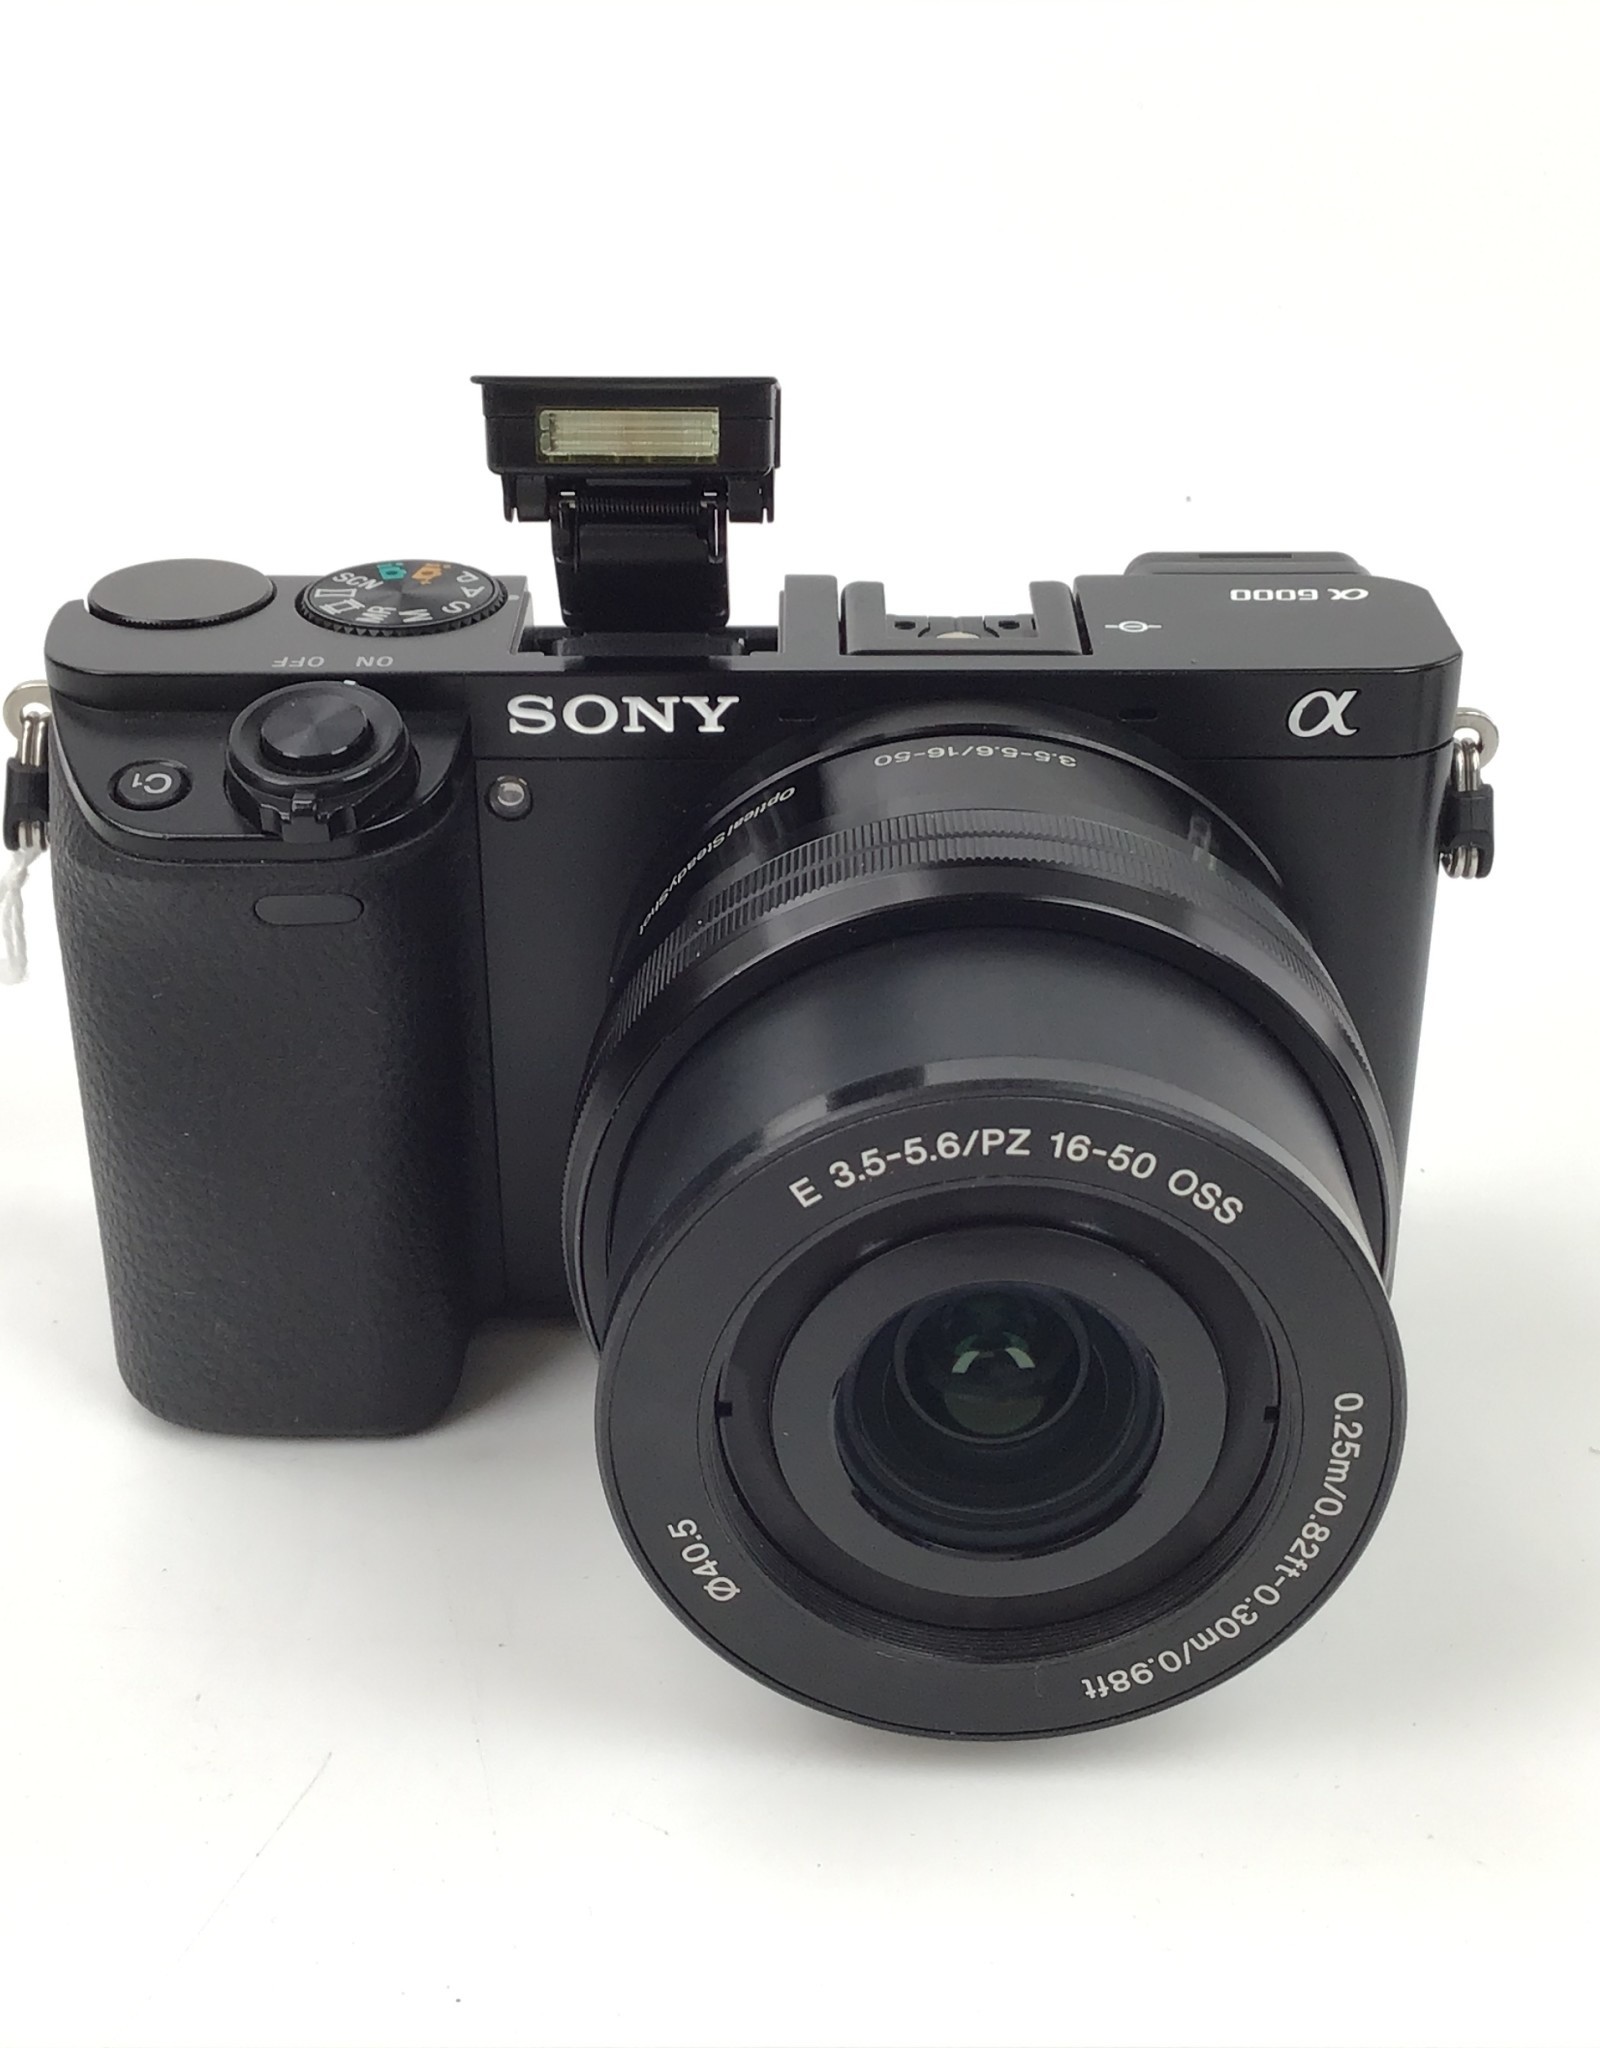 SONY Sony a6000 Camera with 16-50mm OSS Lens Used Good